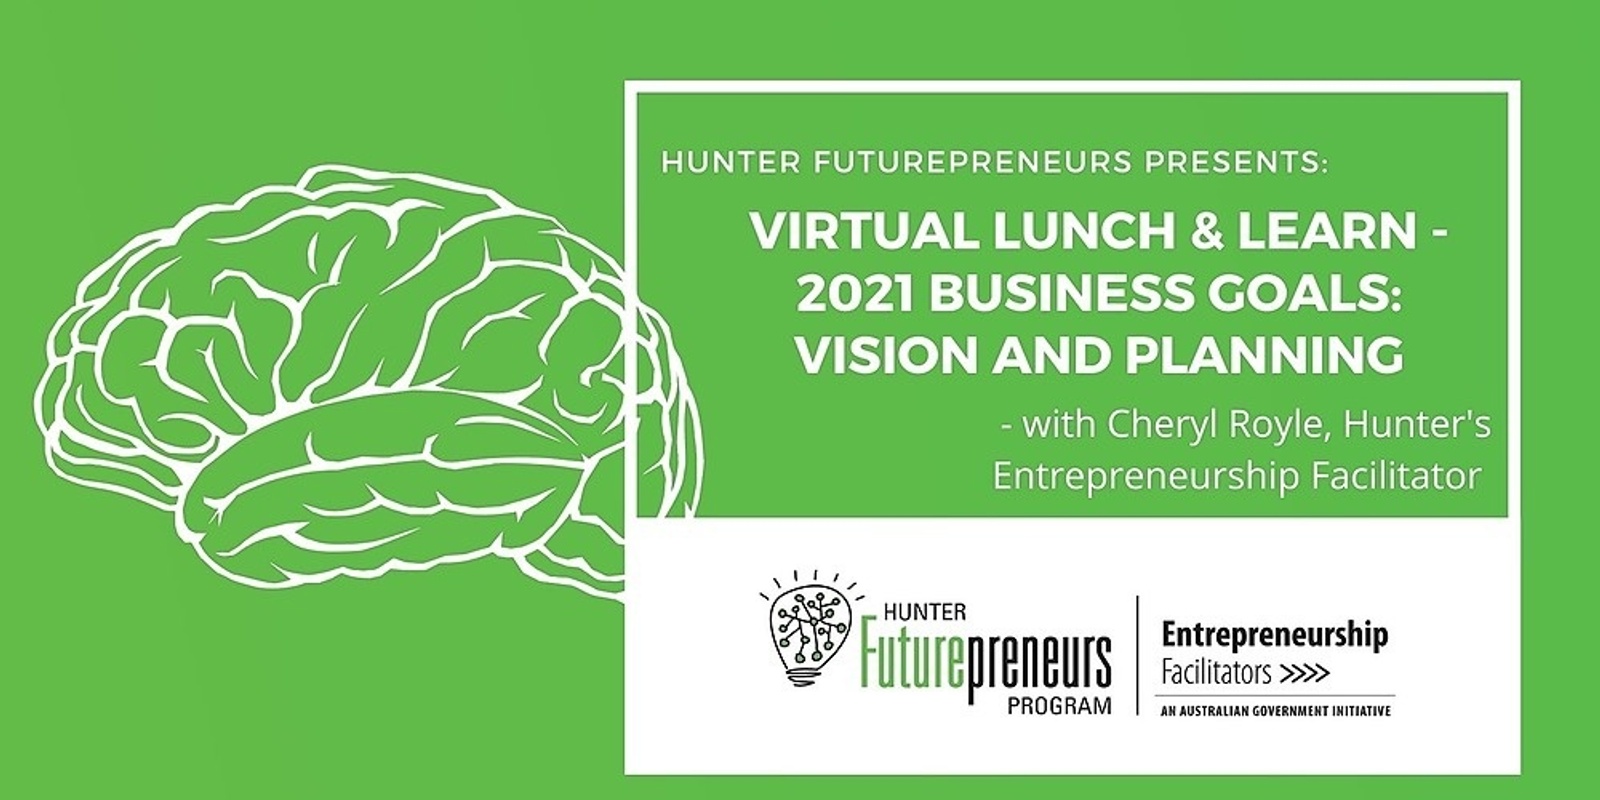 Banner image for Virtual Lunch & Learn - 2021 Business Goals: Vision and Planning with Cheryl Royle